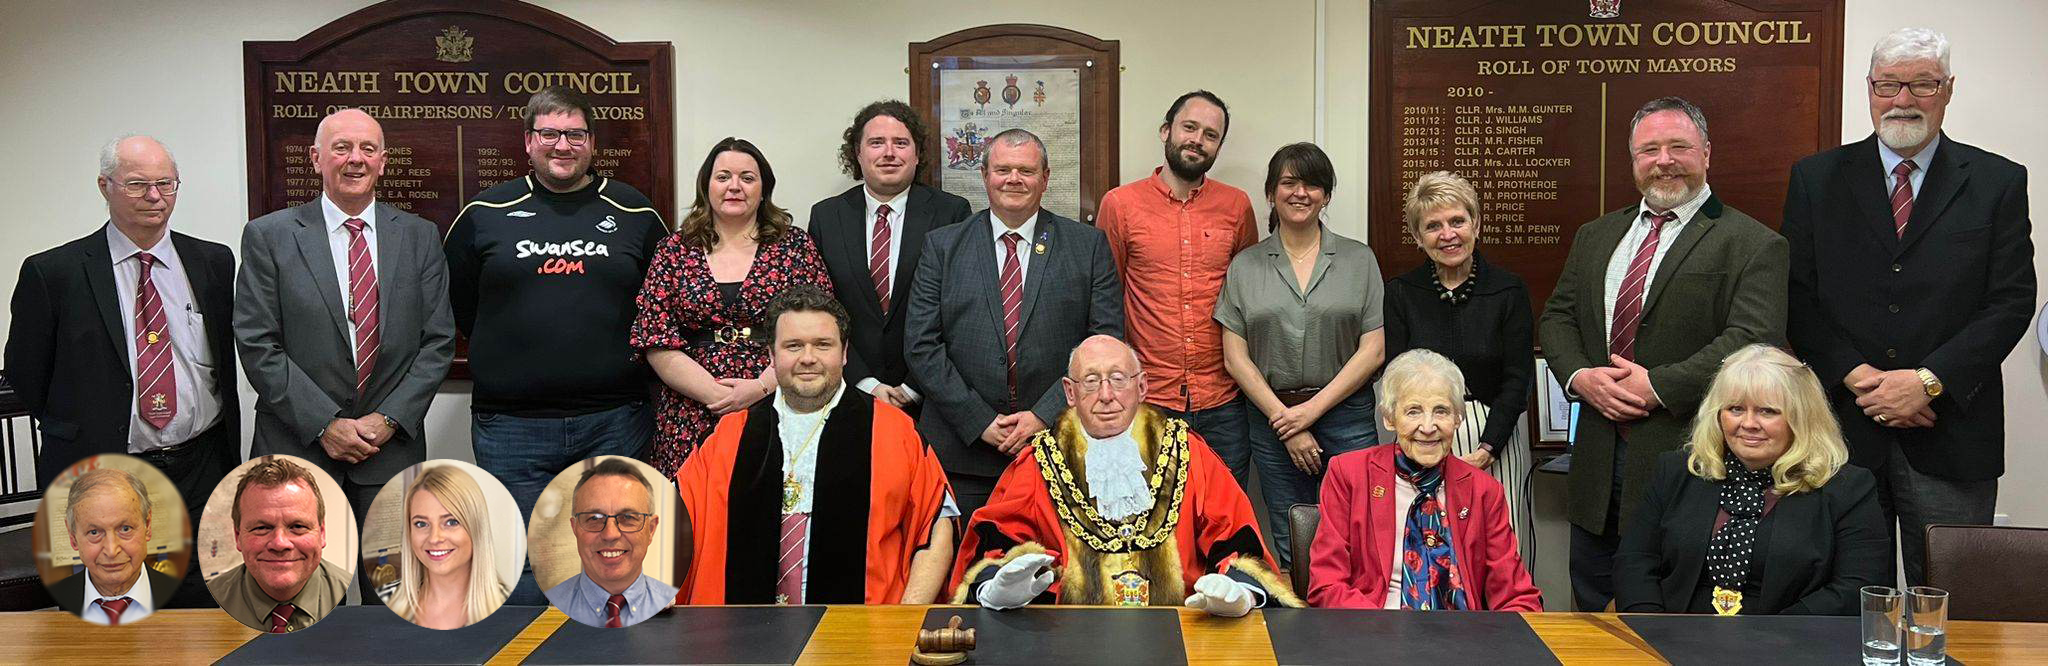 Neath Town Councillors in Chambers